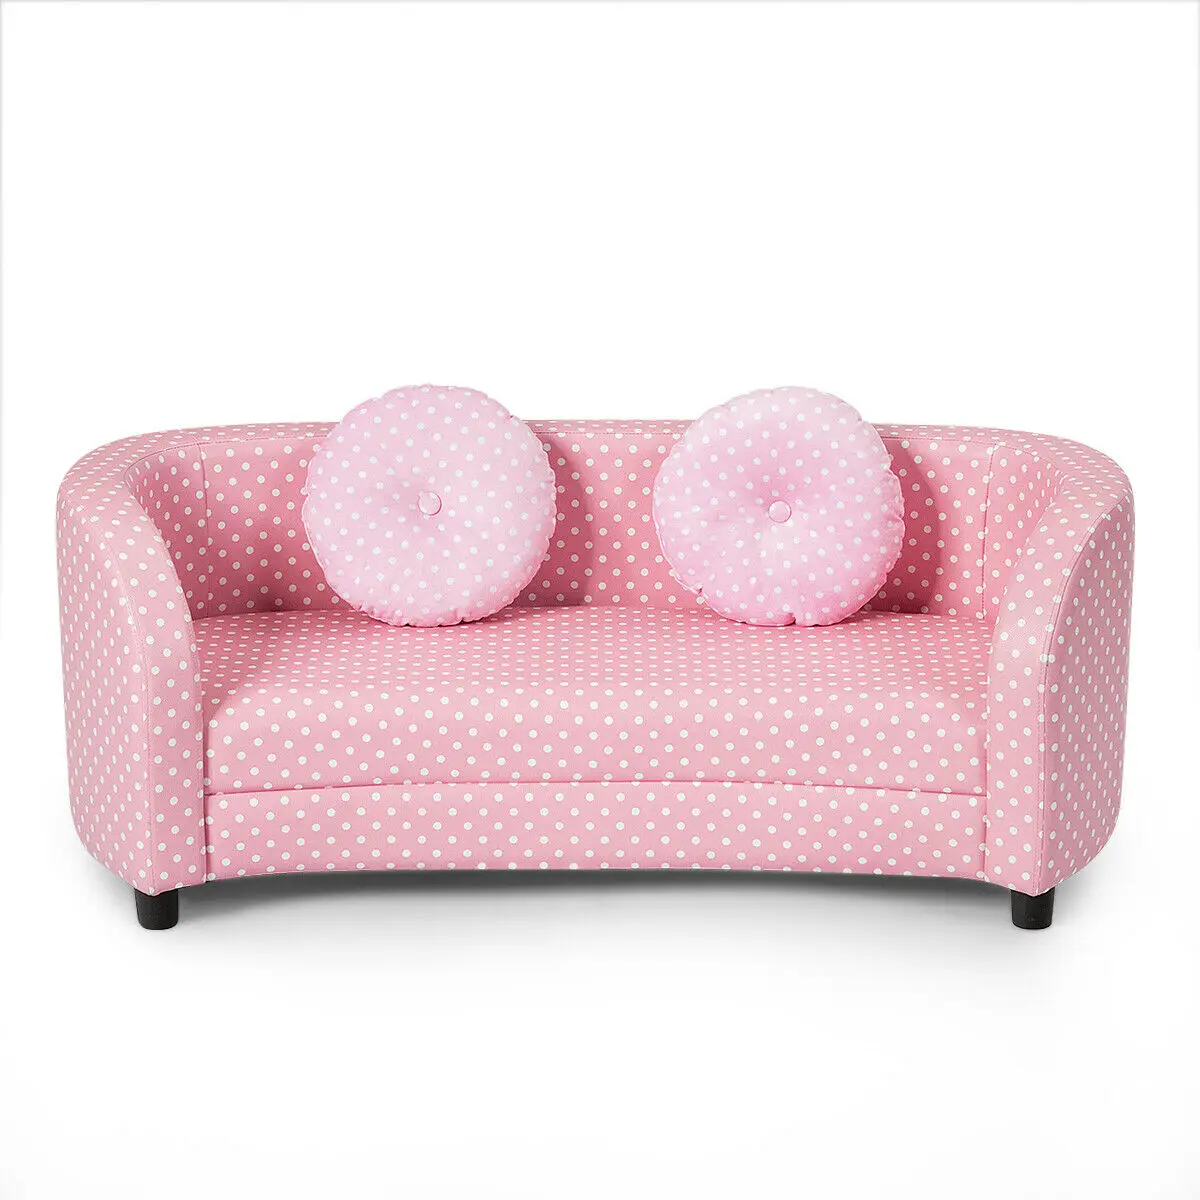 2 Seat Kids Sofa Armrest Chair with Two Cloth Pillows Perfect for Girls Pink  HW61179